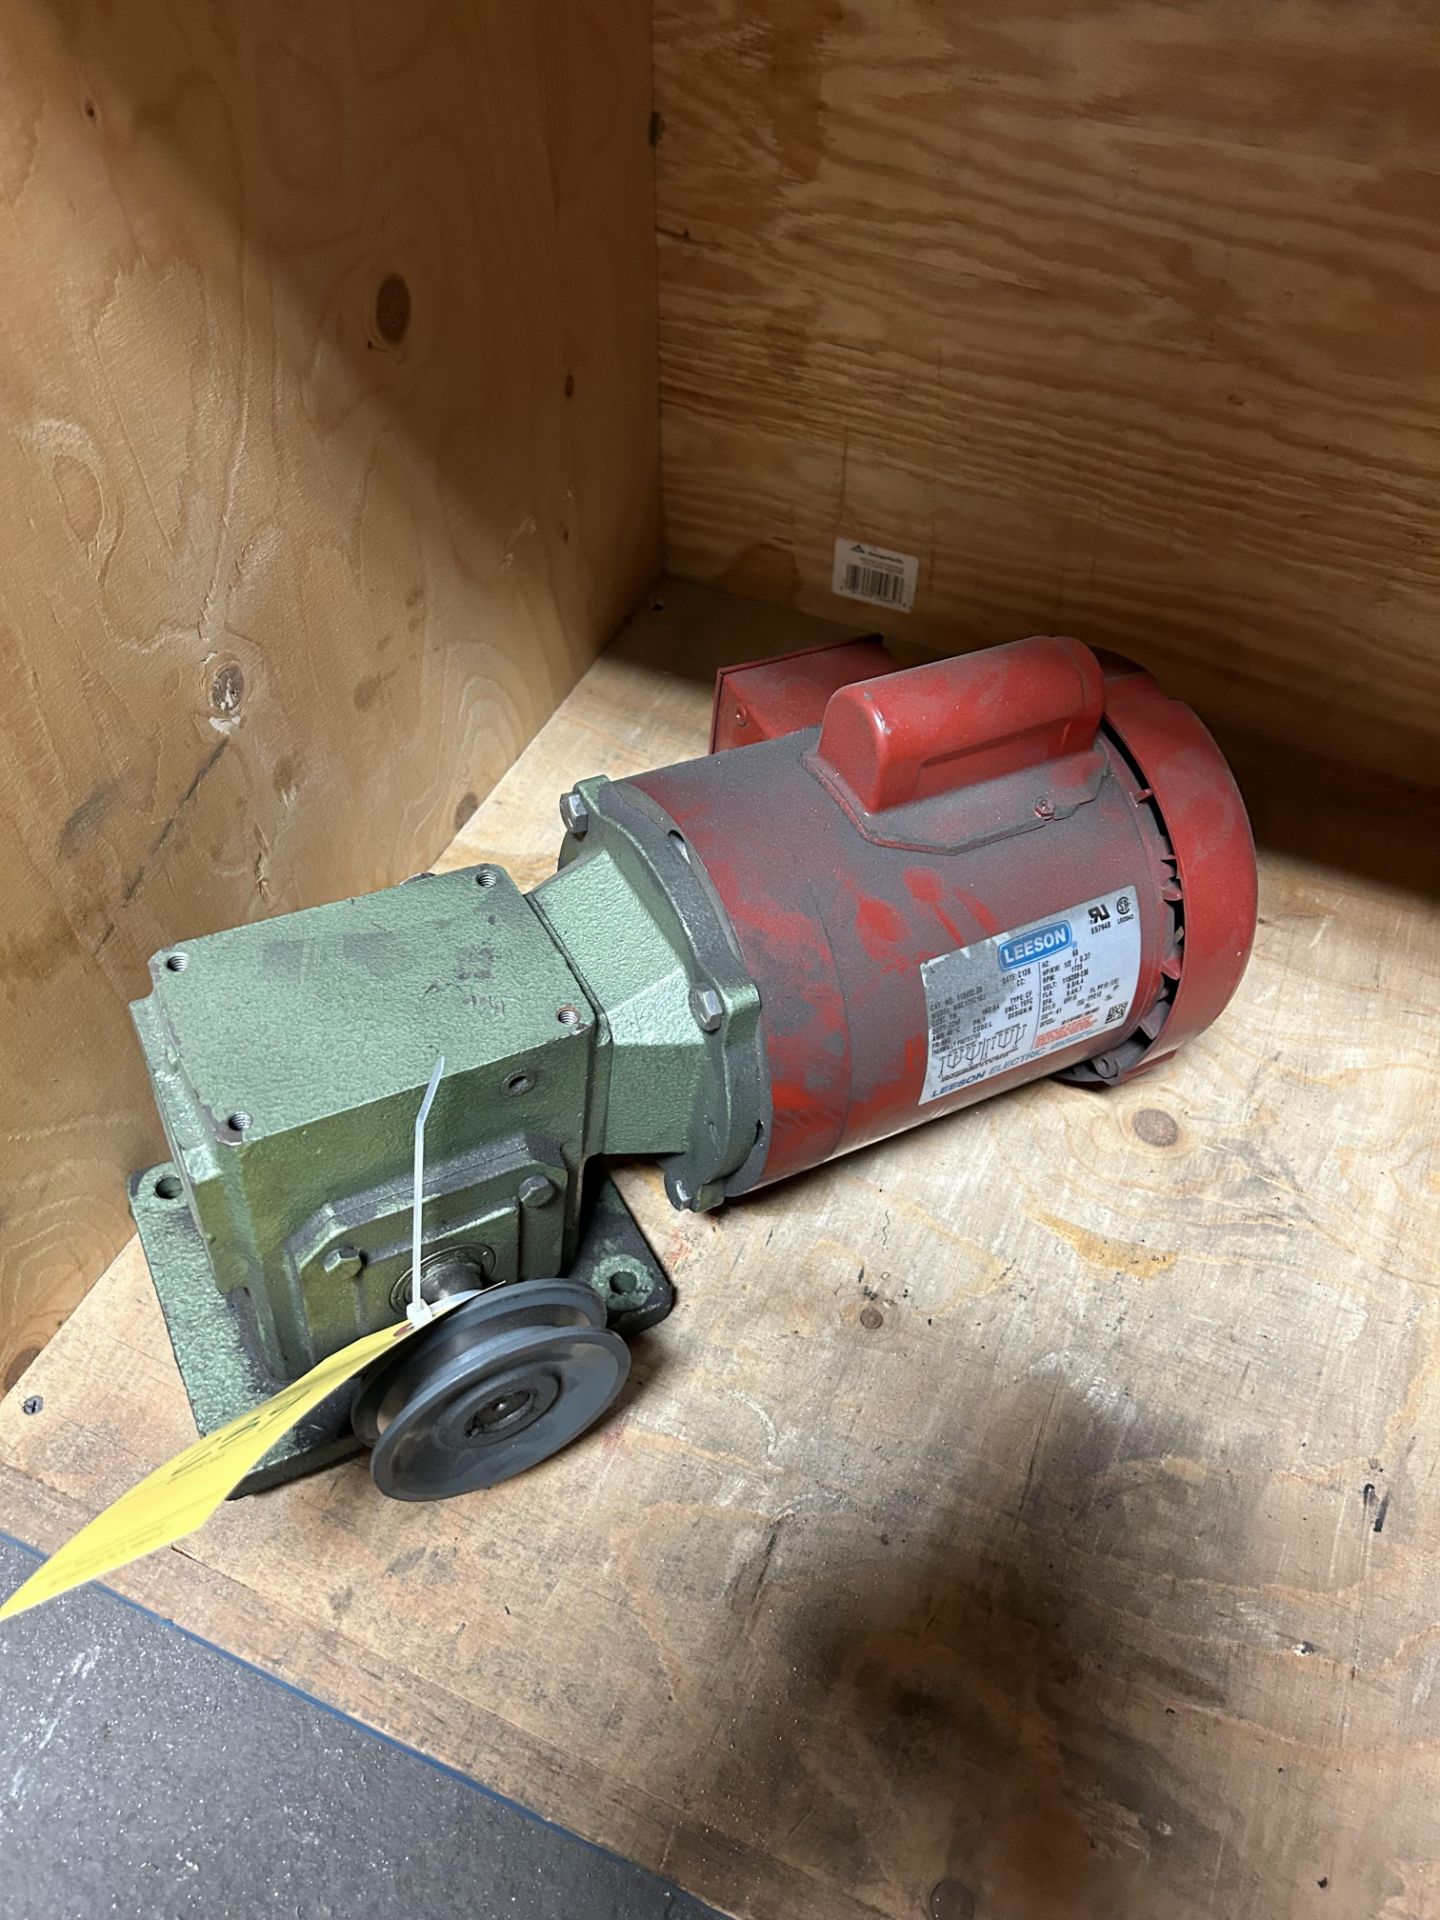 Leeson 1/2 HP Motor with Gear Reducer, Rigging/Loading Fee: $10